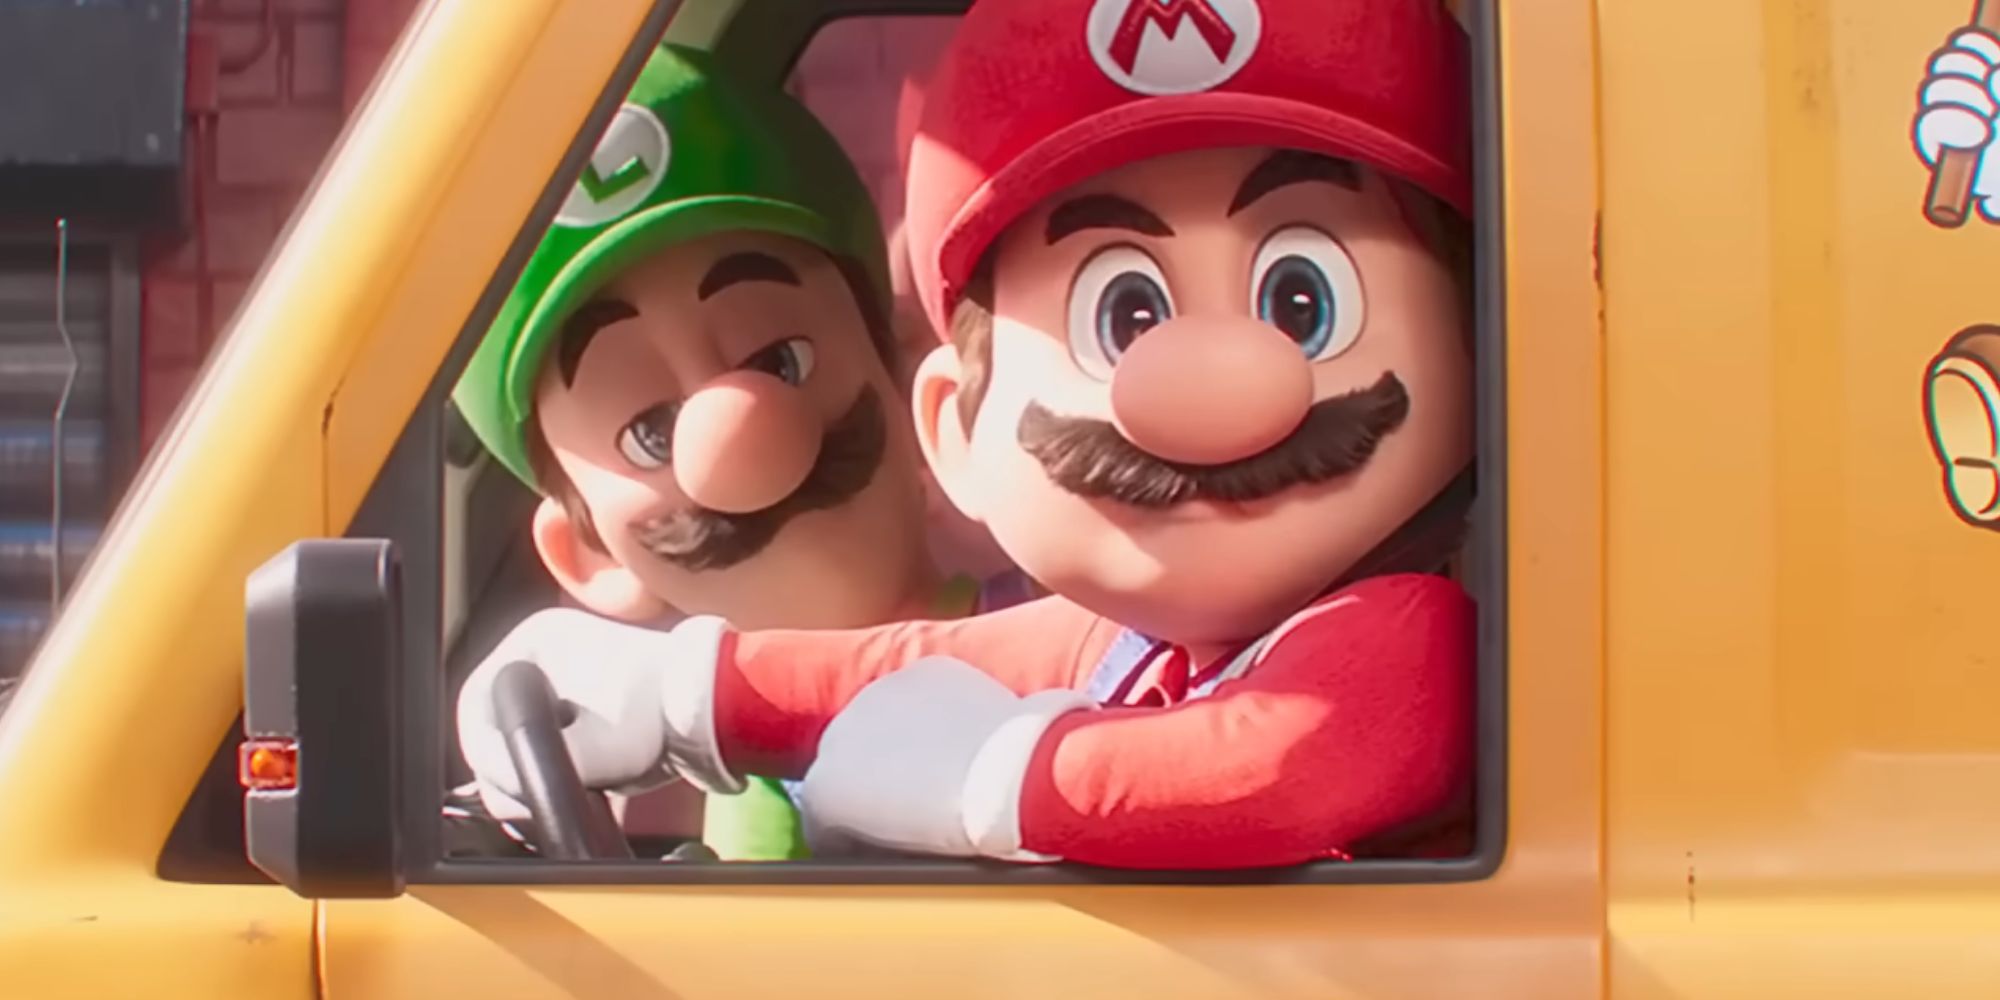 Mario and Luigi looking out the window of a van